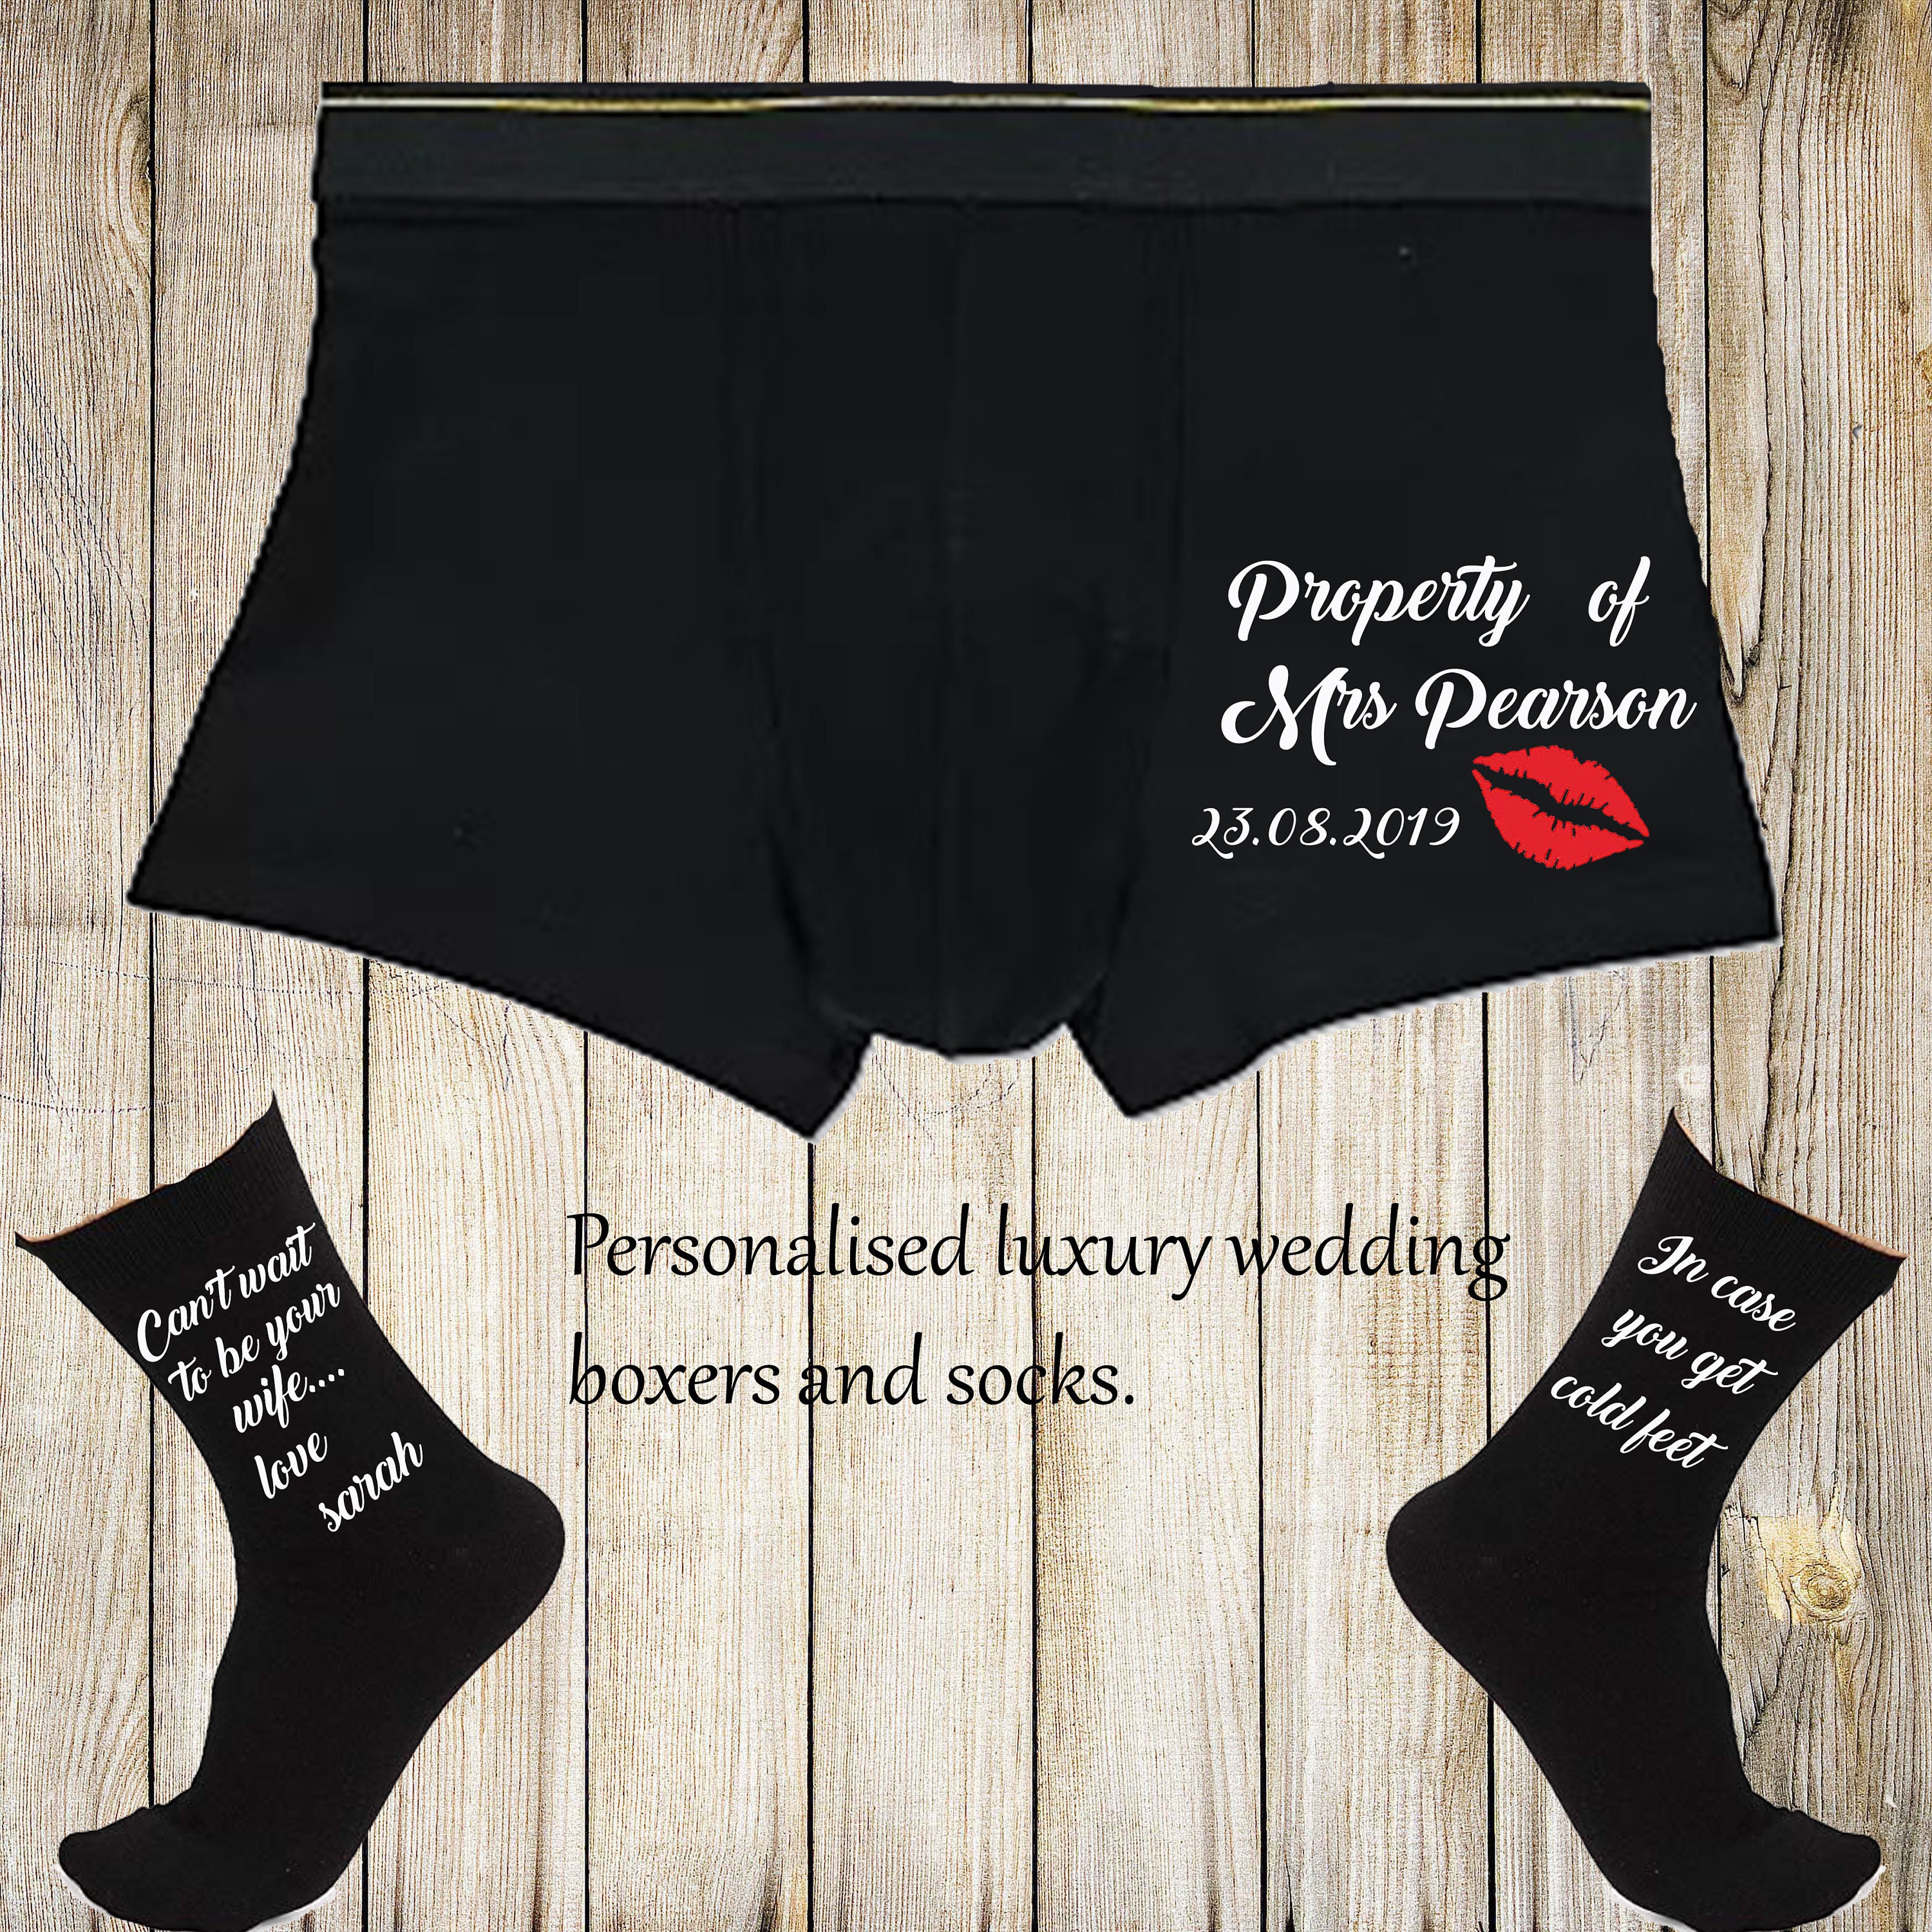 Personalised Property of Novelty Wedding Morning Anniversary Funny Boxers Boxer Shorts Groom Gift Novelty** TRUNK FIT ORDER SIZE ABOVE FOR COMFORT FIT. 